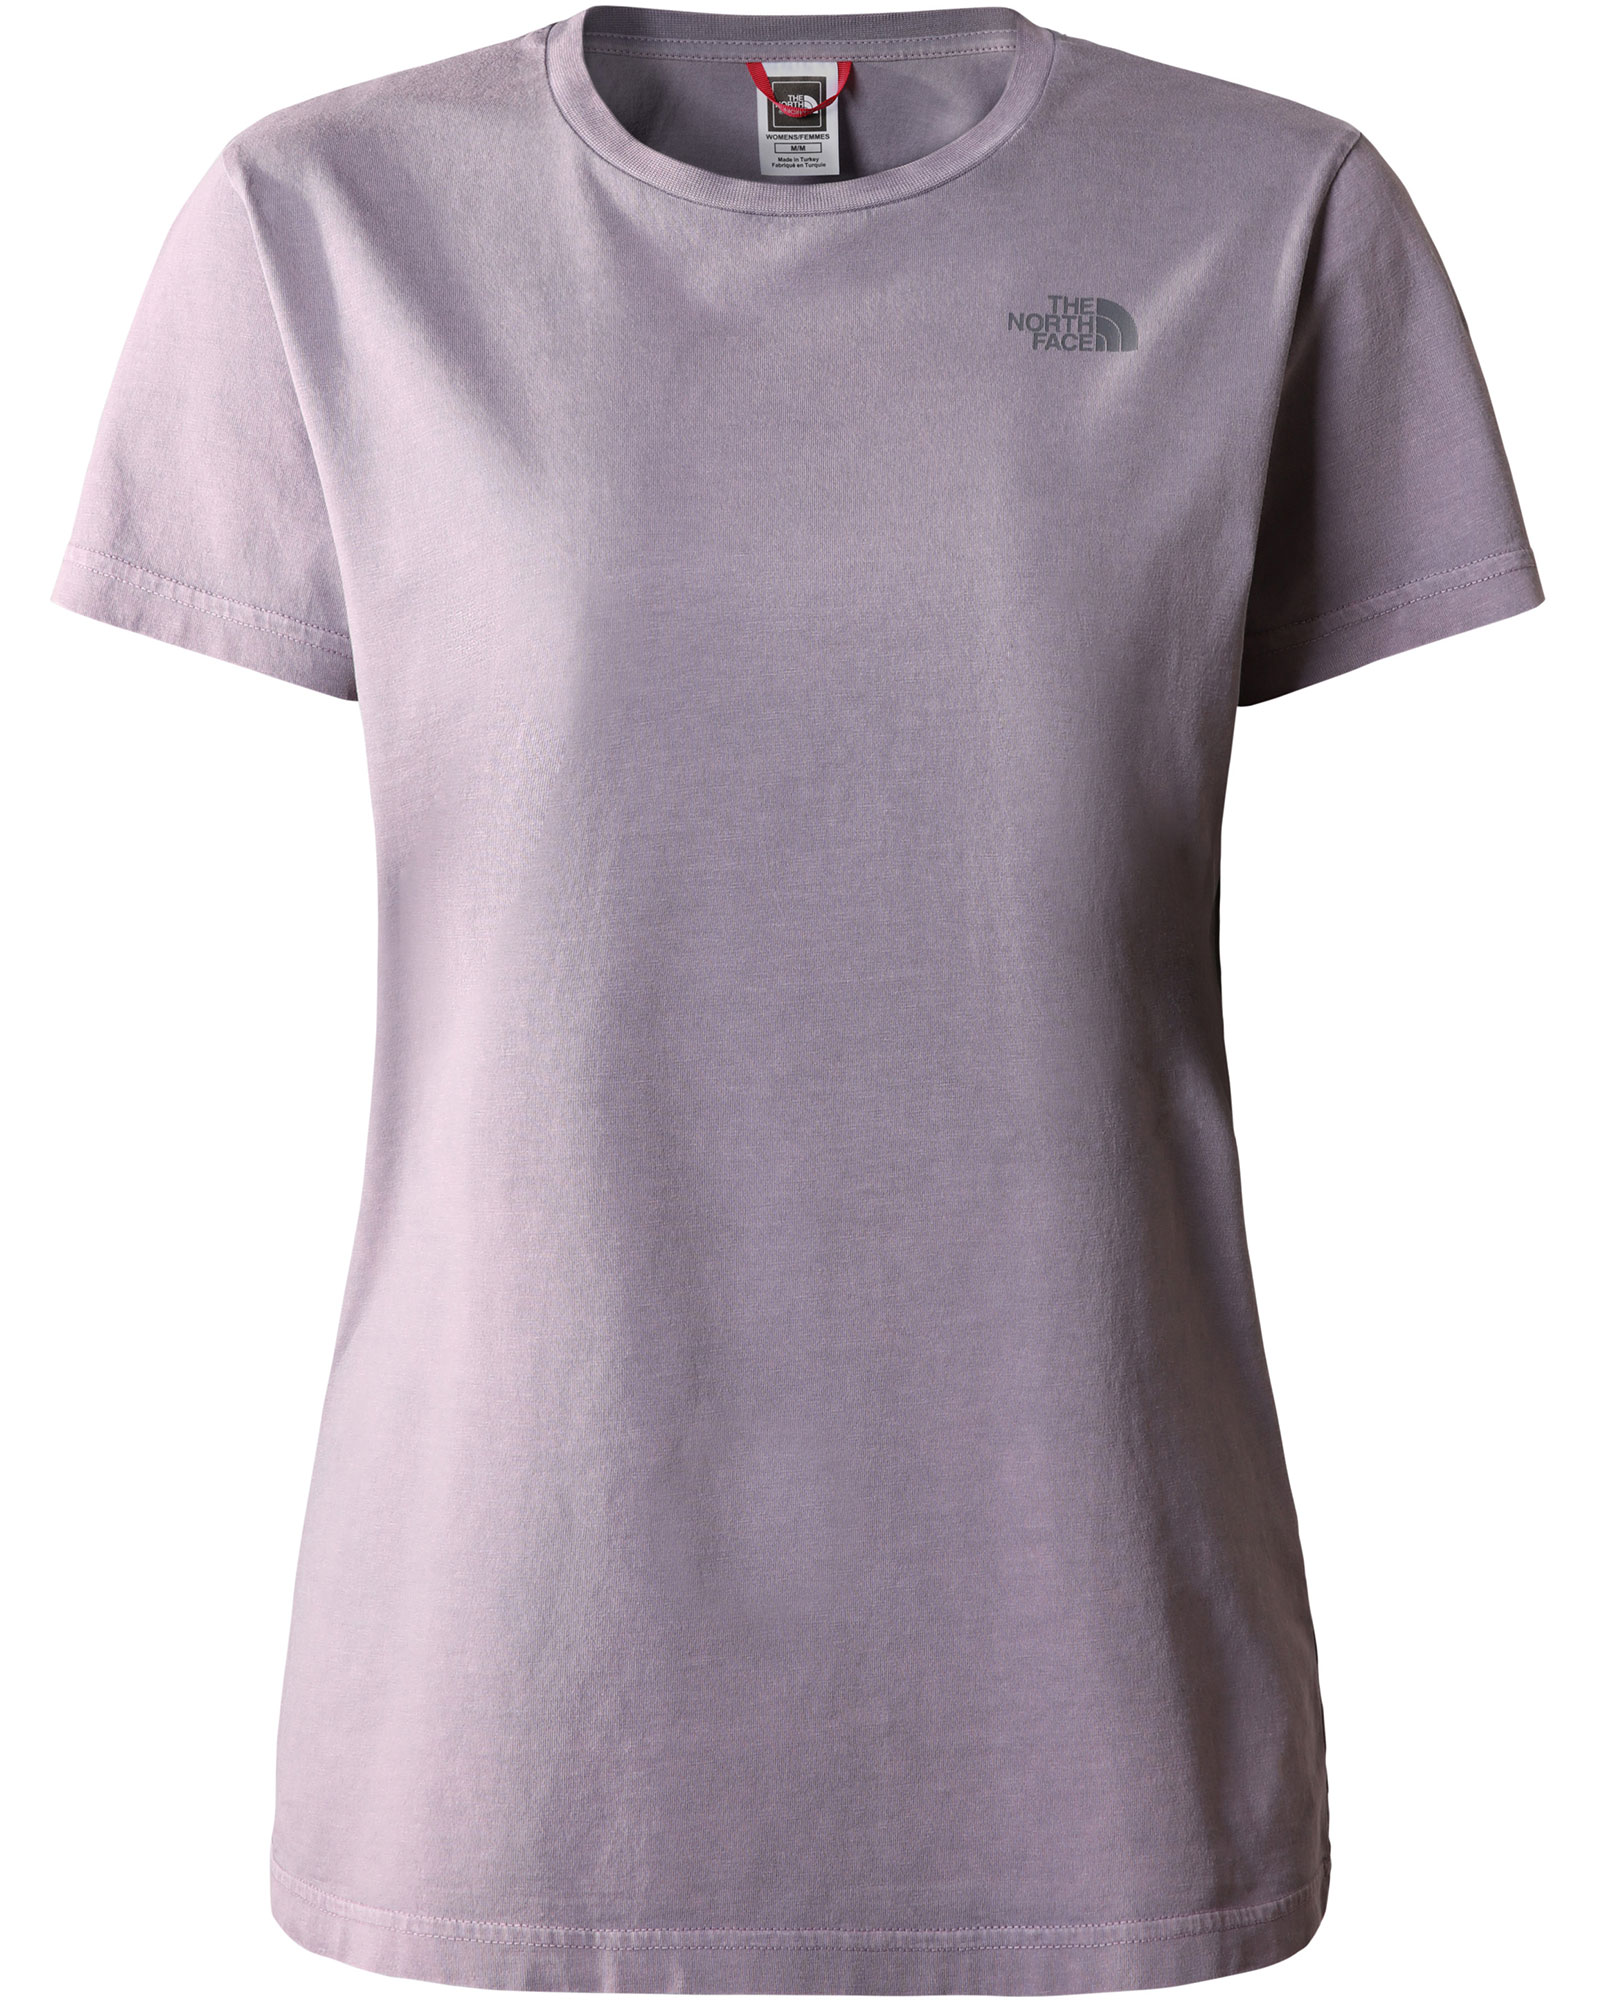 The North Face Women's Heritage Dye Pack Logowear T-Shirt